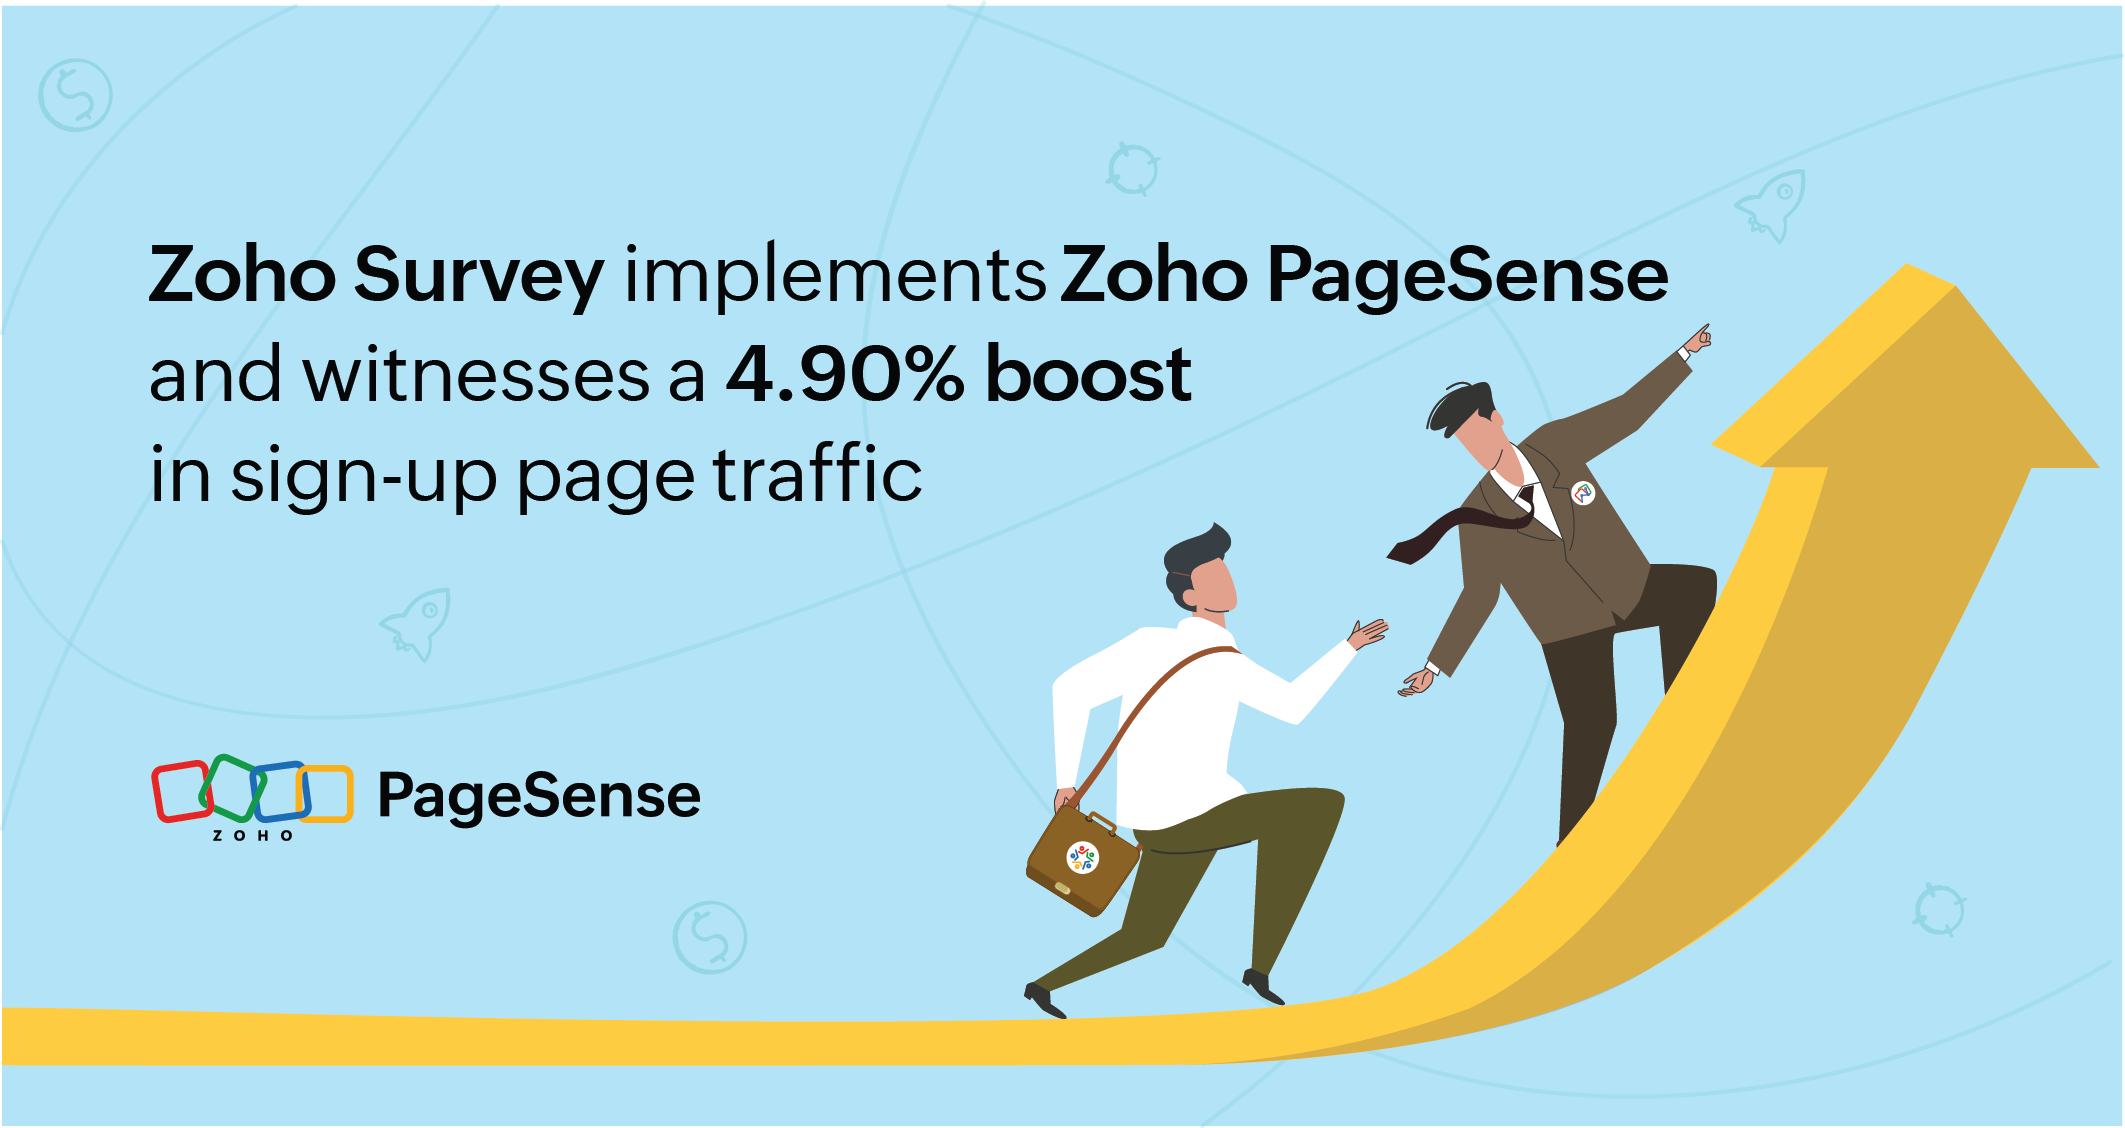 Zoho Survey implements Zoho PageSense and witnesses a 4.90% boost in sign-up page traffic